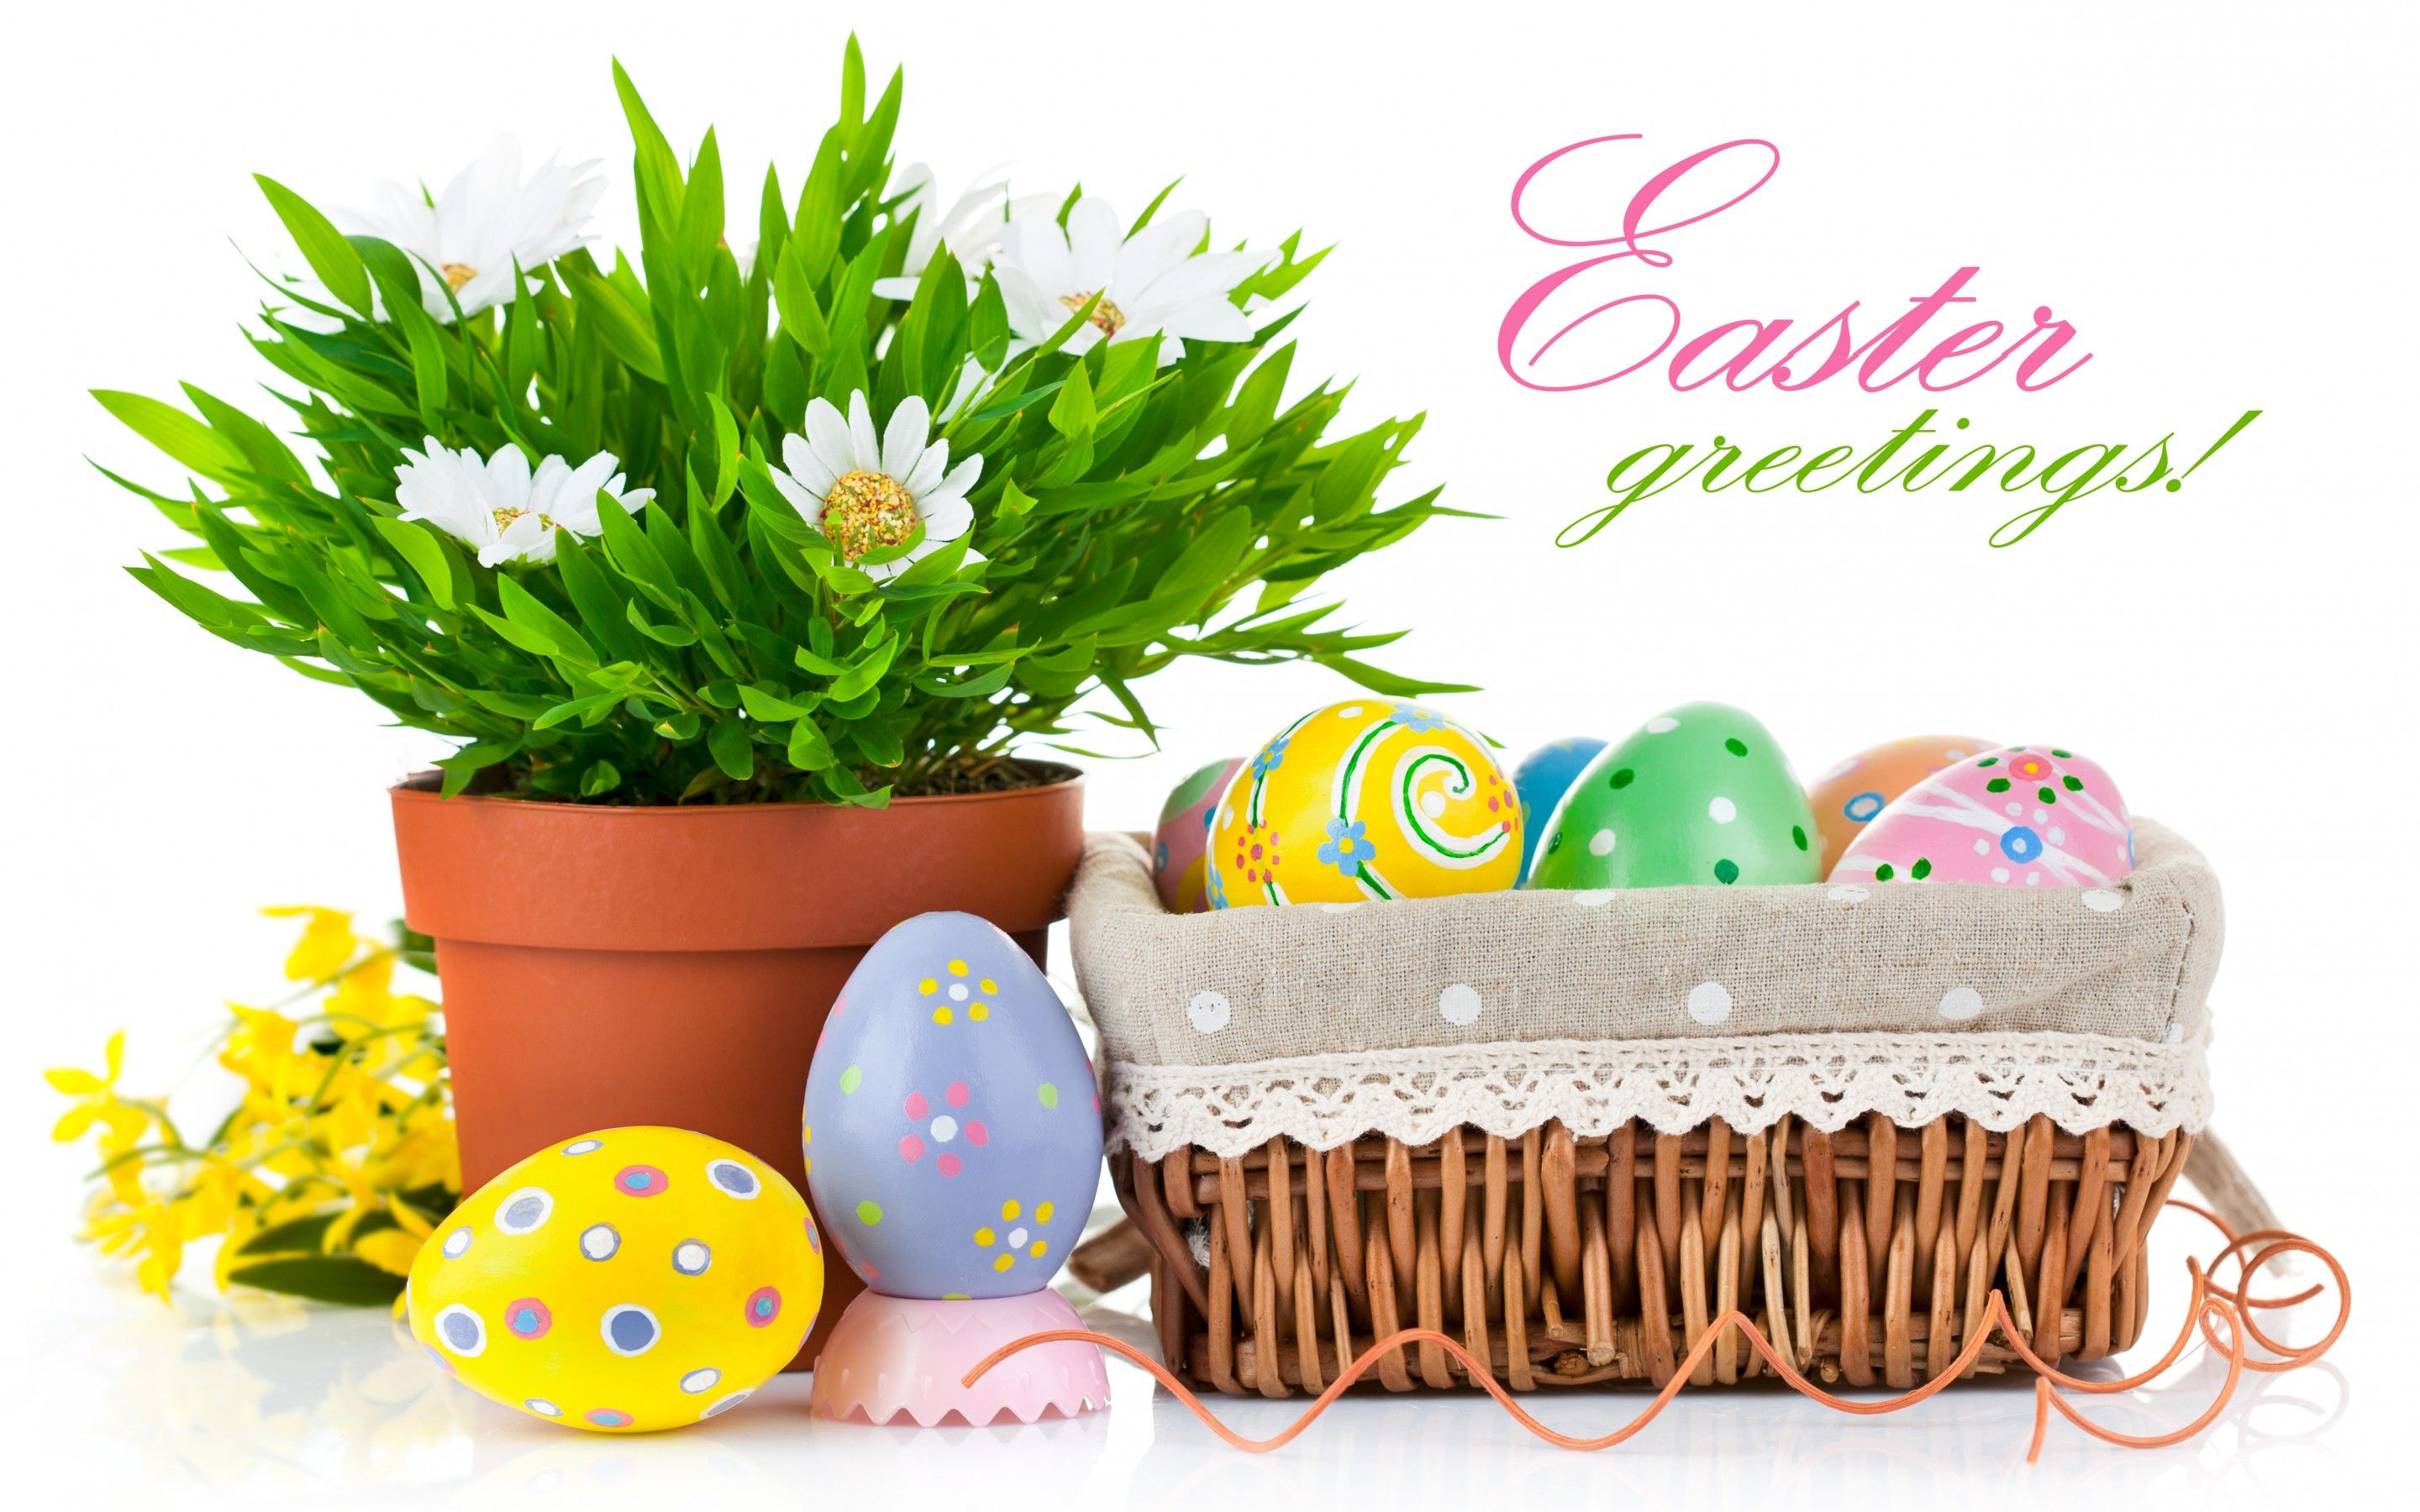 Advance Happy Easter Image HD Photo Picture Pics for Facebook & WhatsApp 2021. Happy Easter Image 2021. Easter Picture. Good Friday Image. Passover Image. Easter Bunny Image Picture